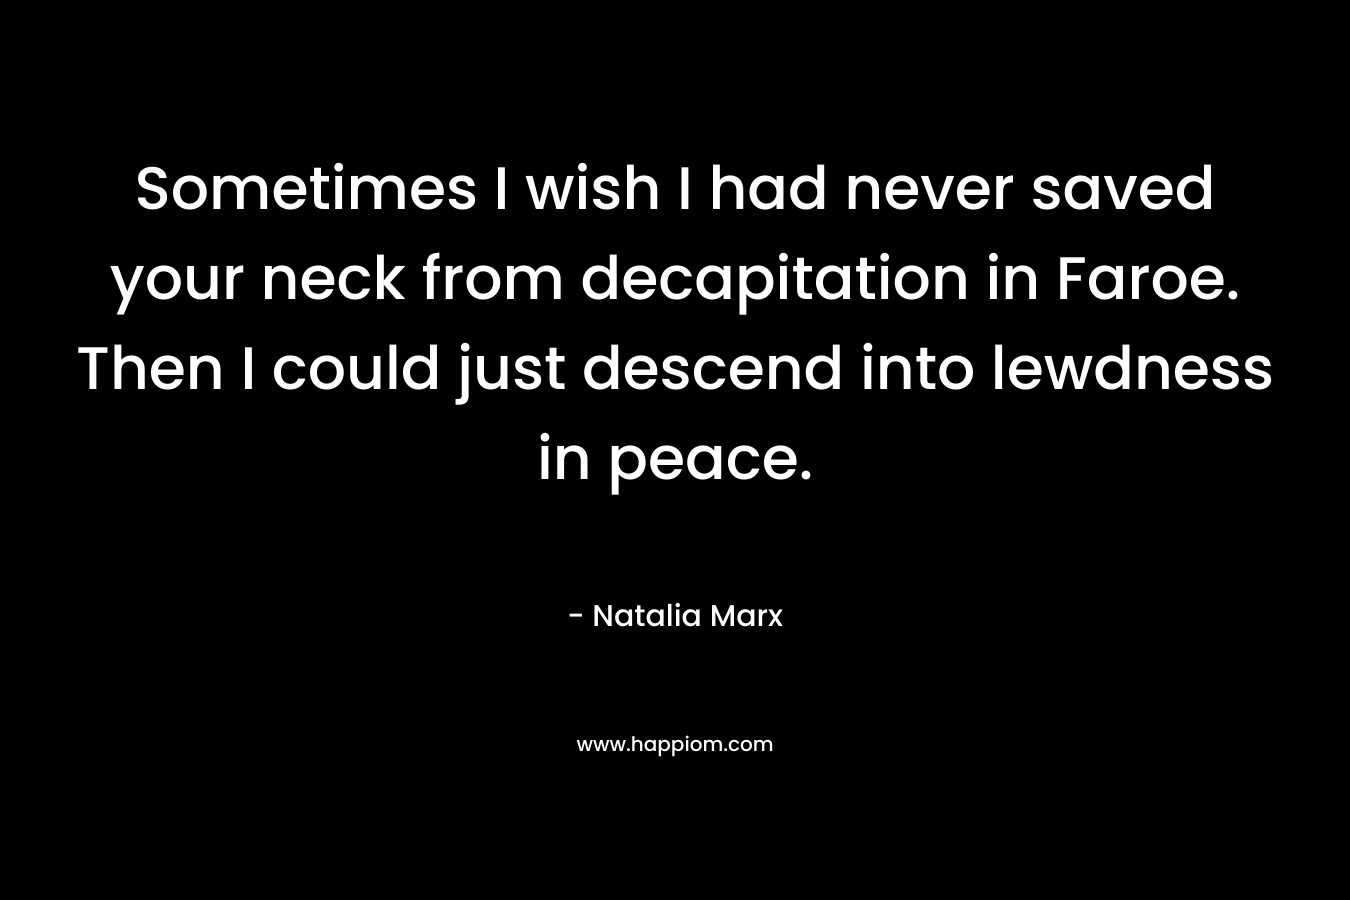 Sometimes I wish I had never saved your neck from decapitation in Faroe. Then I could just descend into lewdness in peace. – Natalia Marx